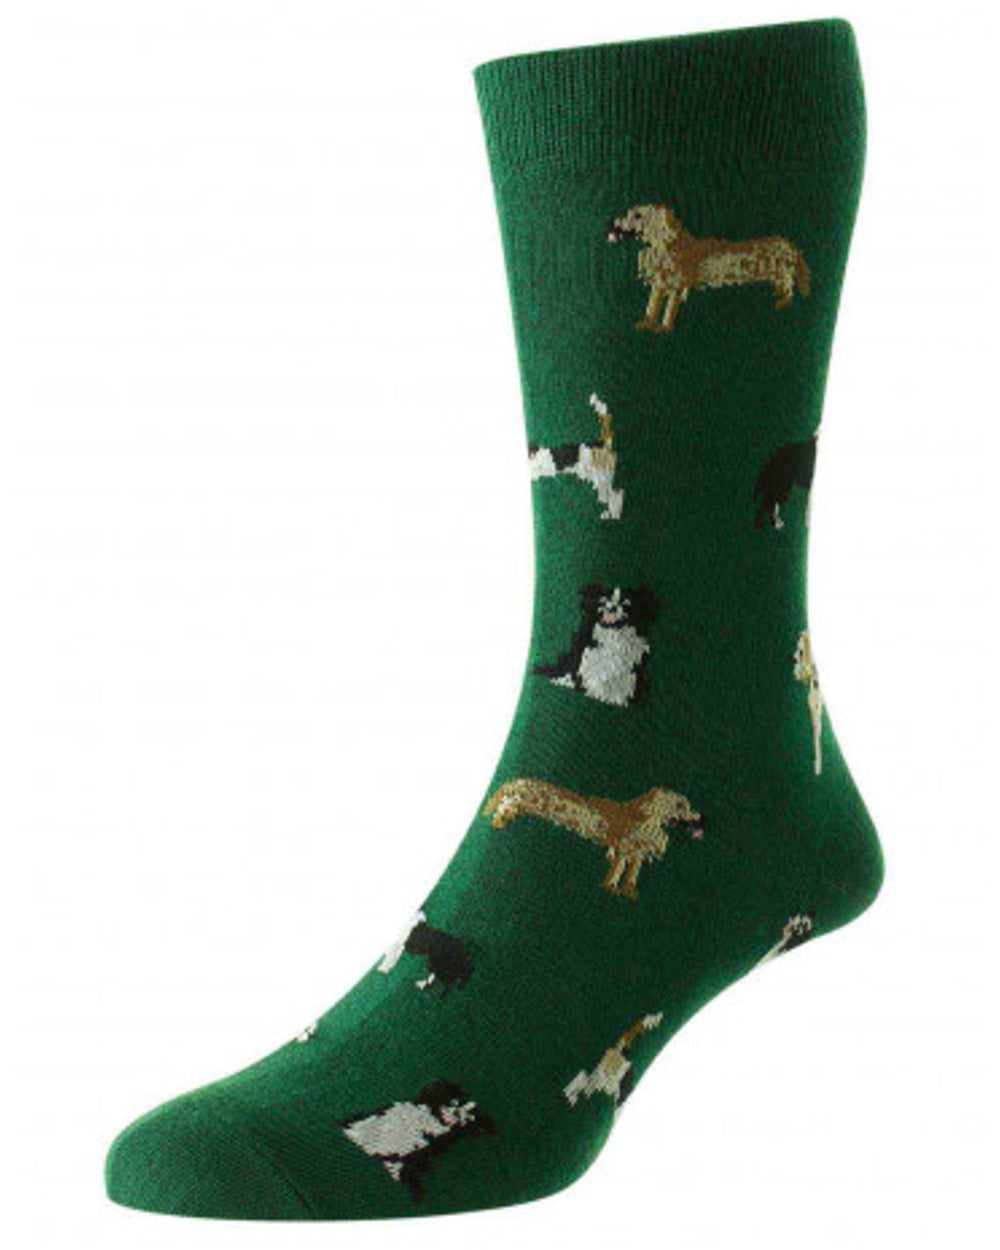 HJ Hall Mens Country Dogs Motif Cotton Rich Socks in Green 